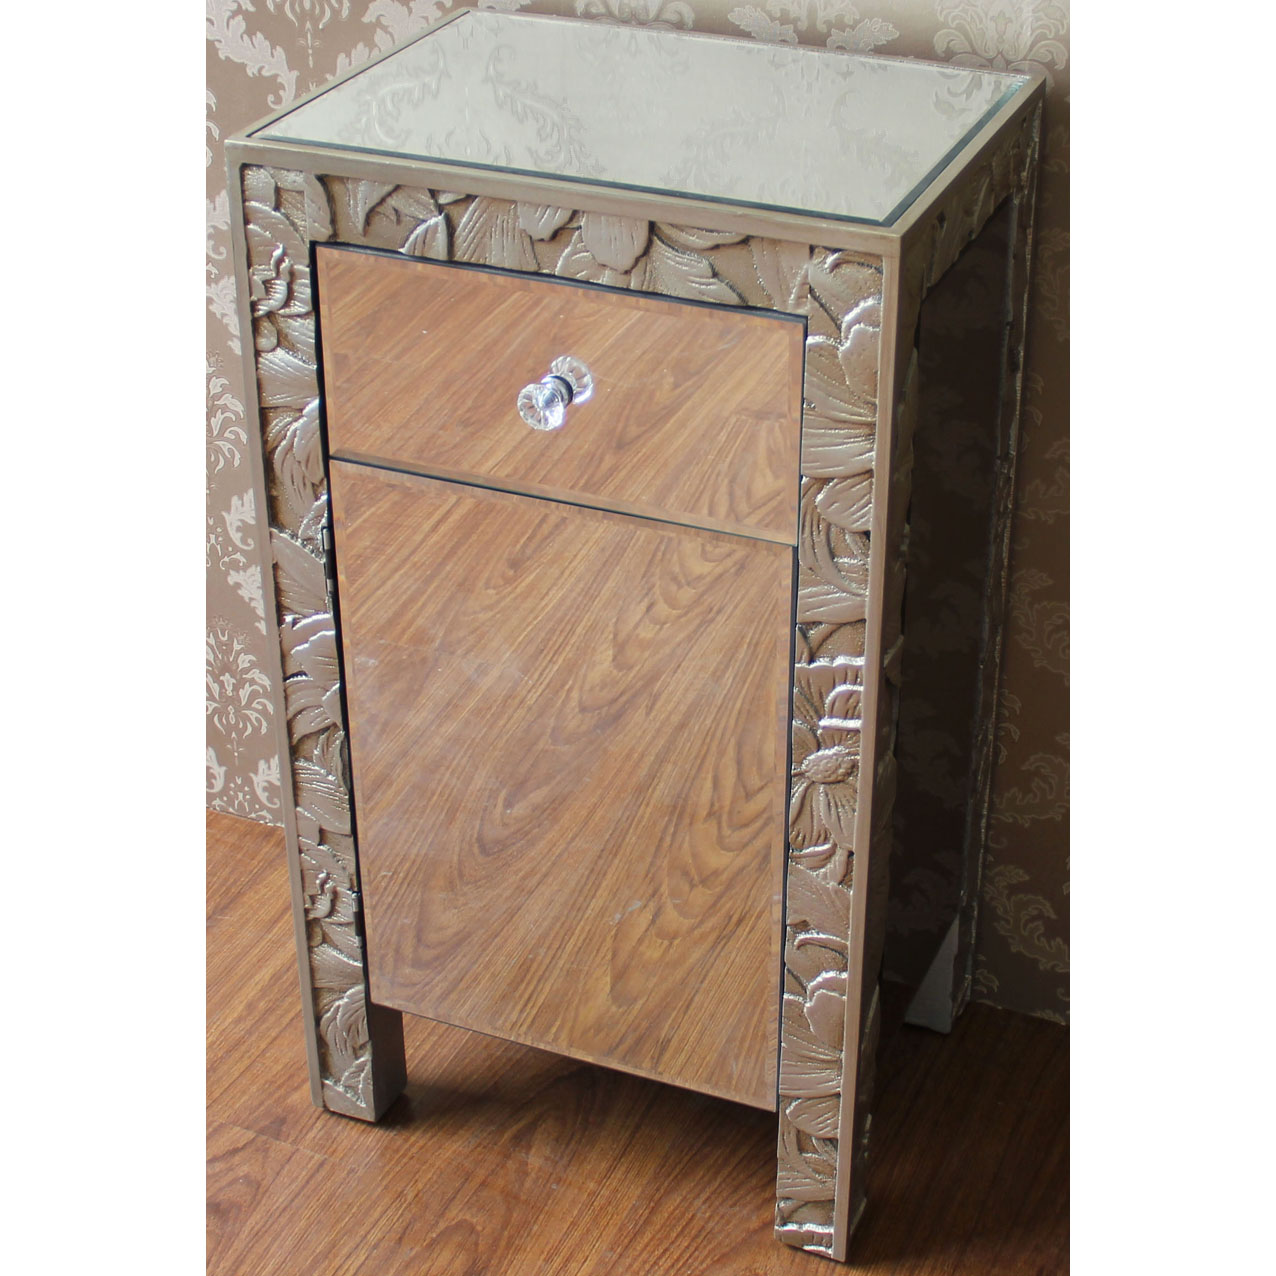 Champagne color wood night stand with mirror drawer & 1 door